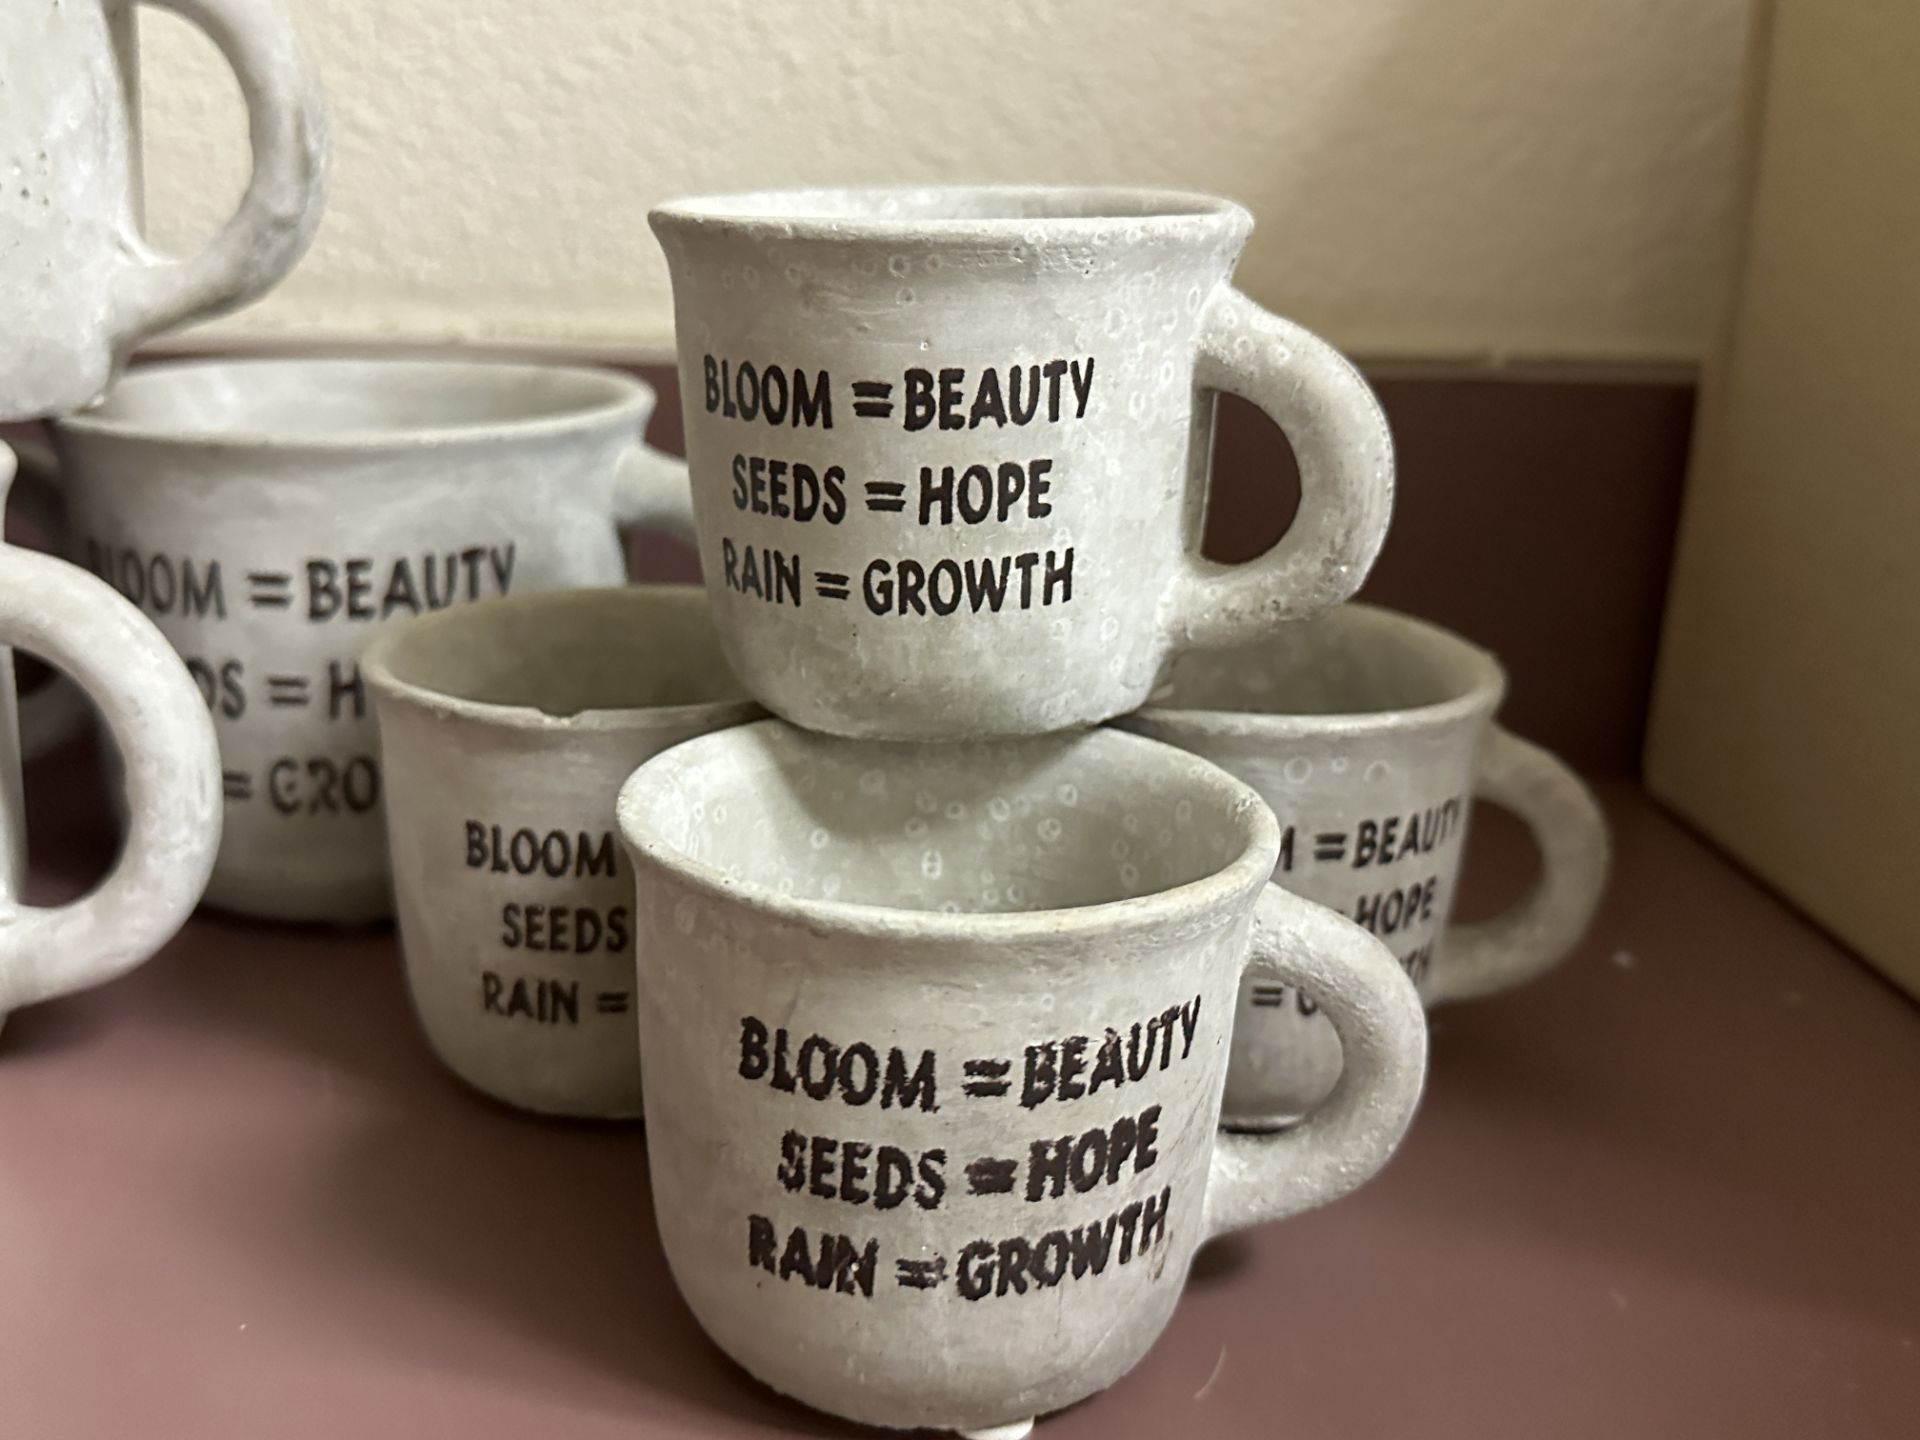 8x Flower Pot Mugs in the shape of coffee mugs - Image 4 of 4